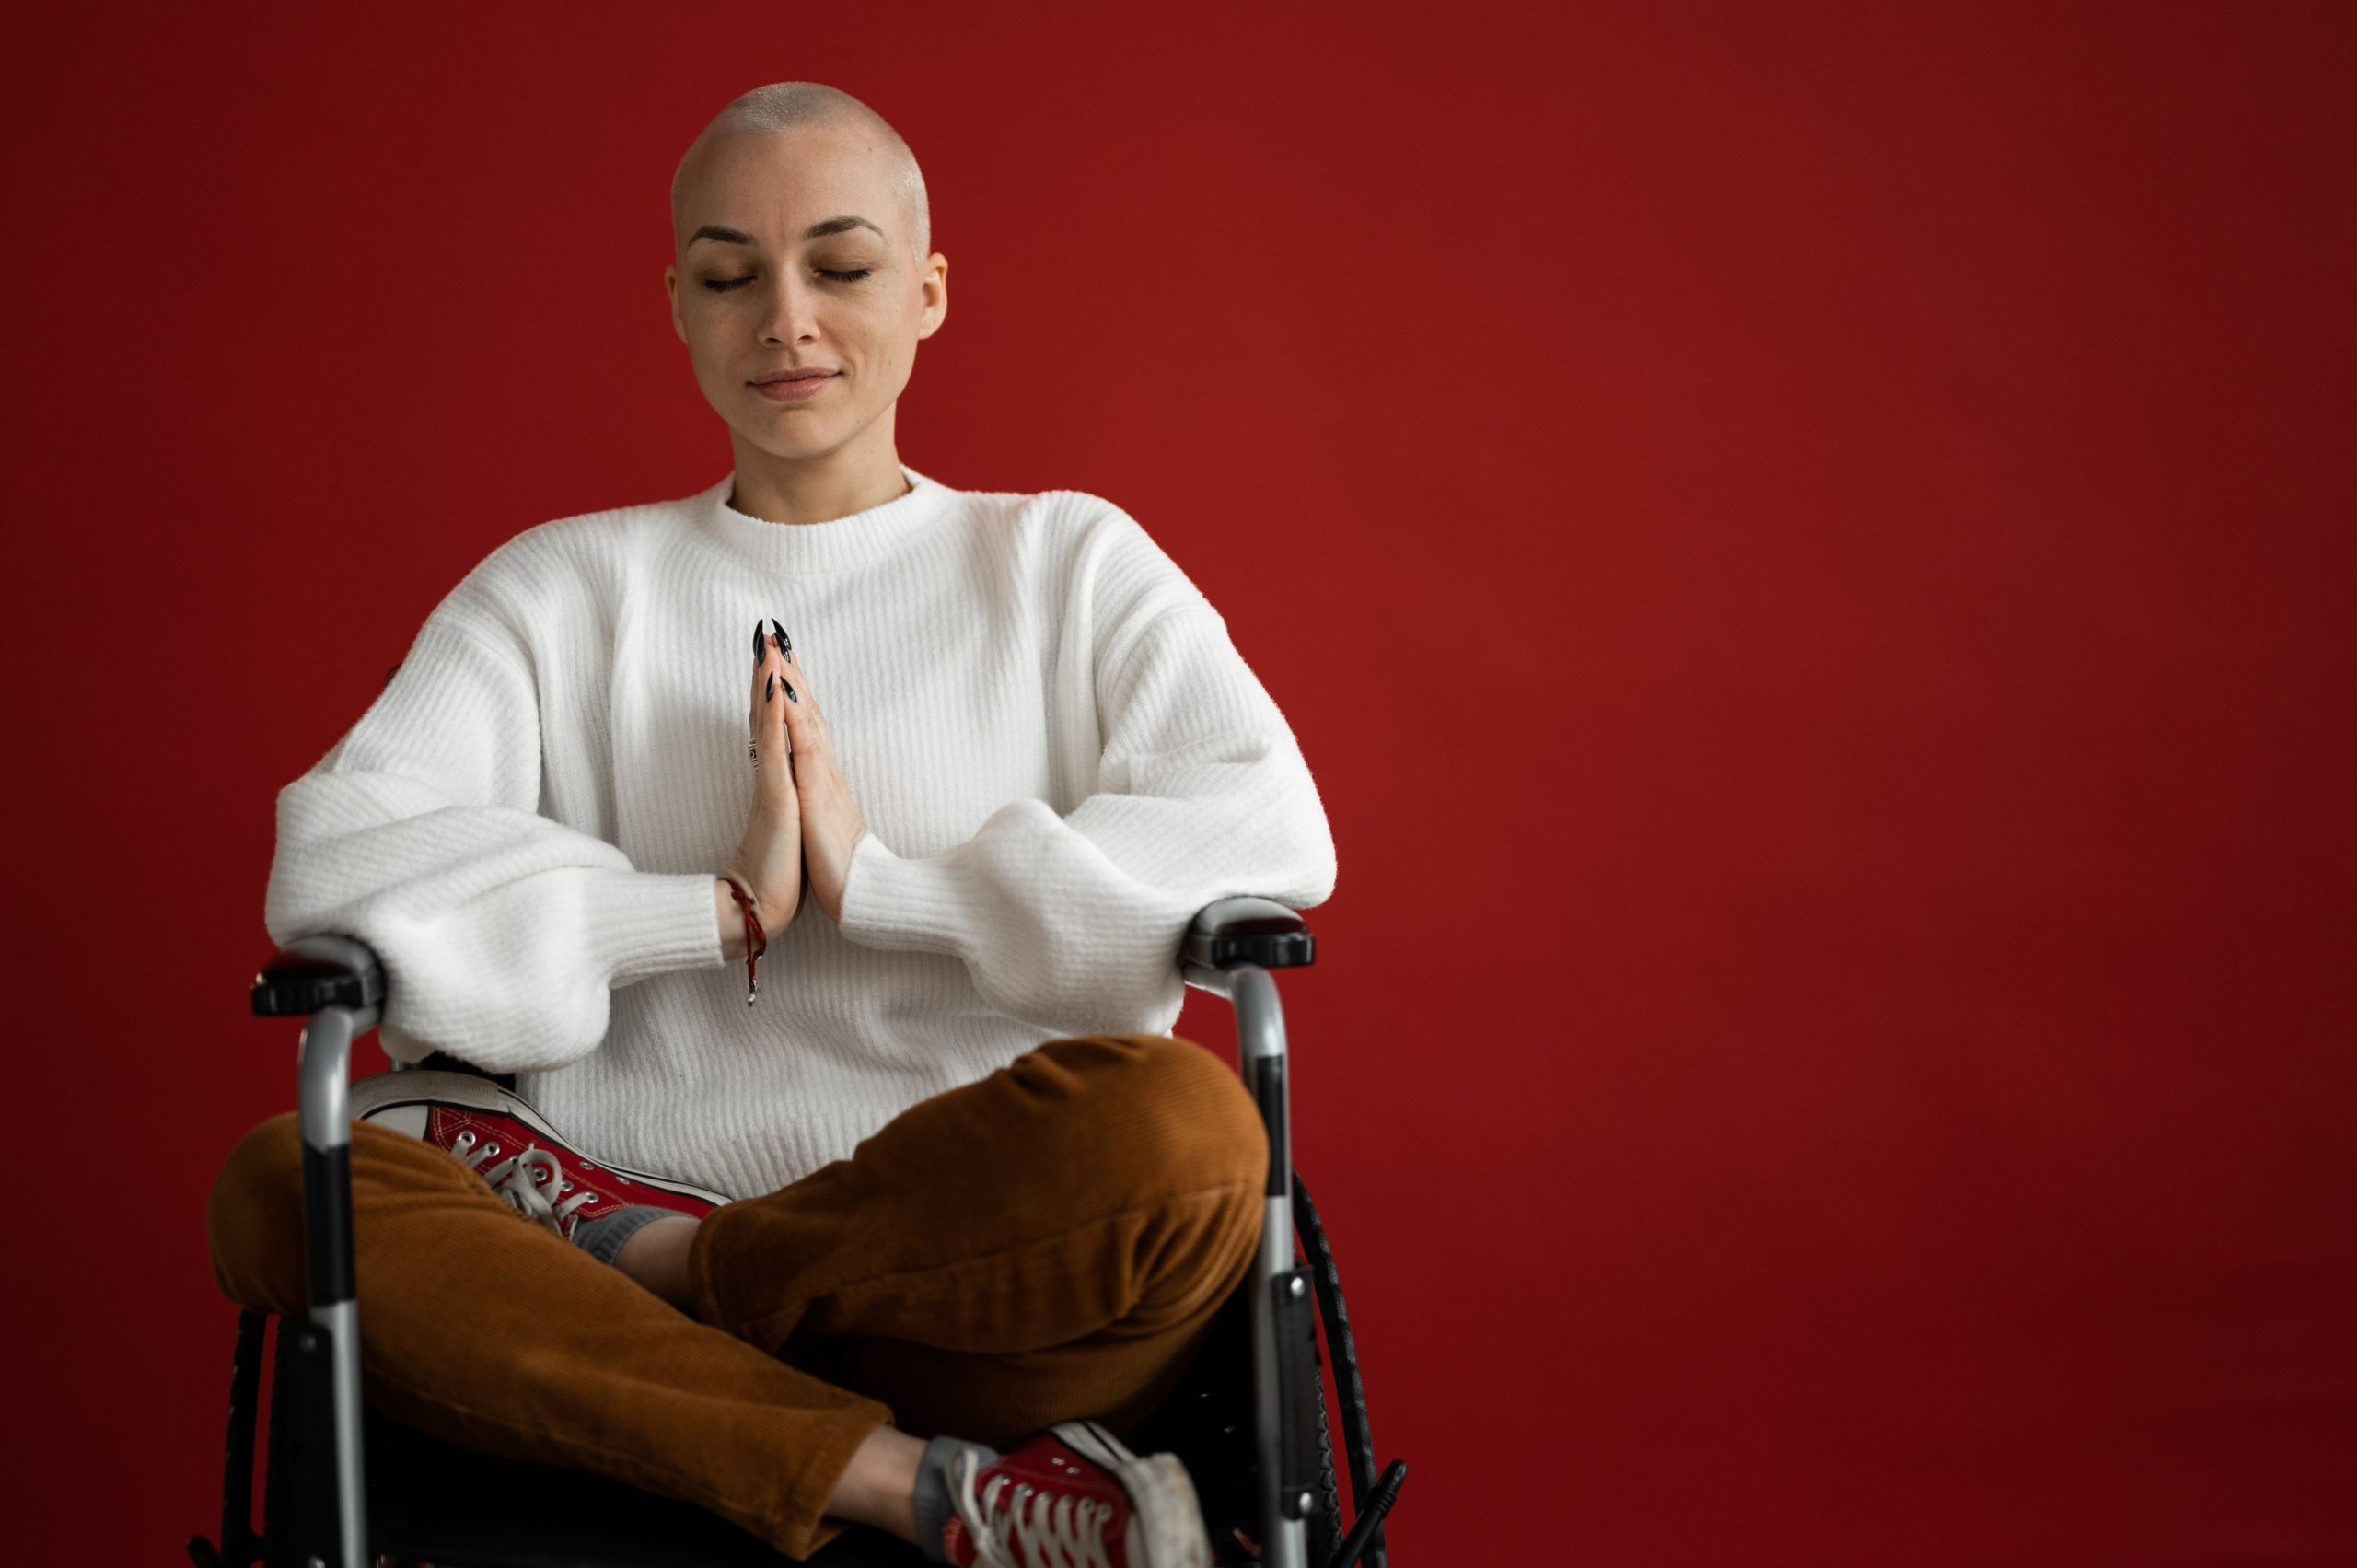 Contribution picture to the article "Yoga and Cancer" - Young woman with short hair meditates in a wheelchair.